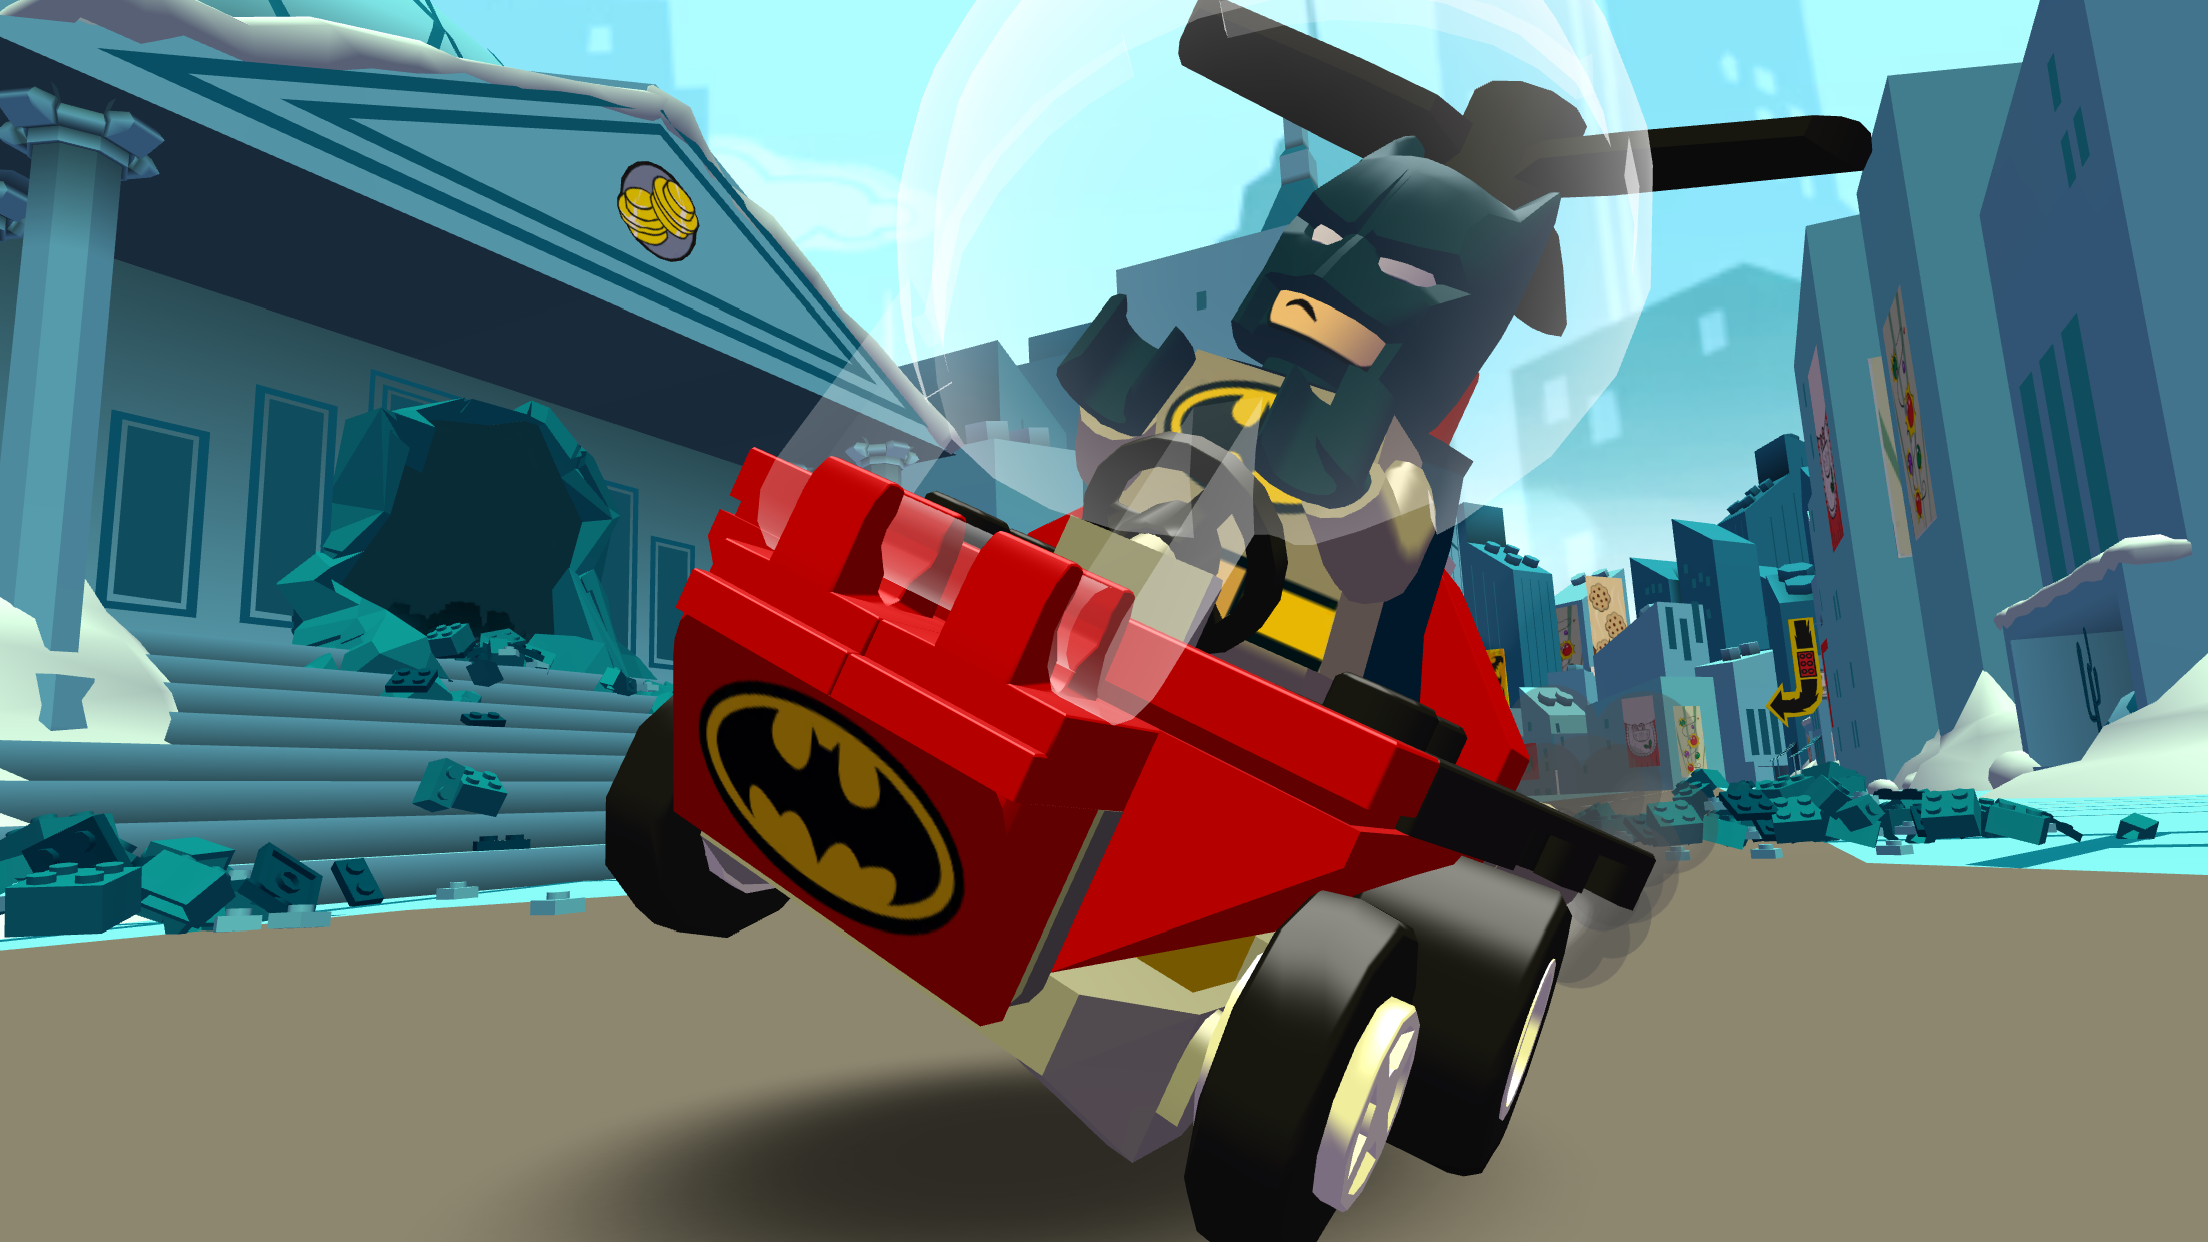 LEGO® Batman™ 2: DC Super Heroes | Download and Buy Today - Epic Games Store